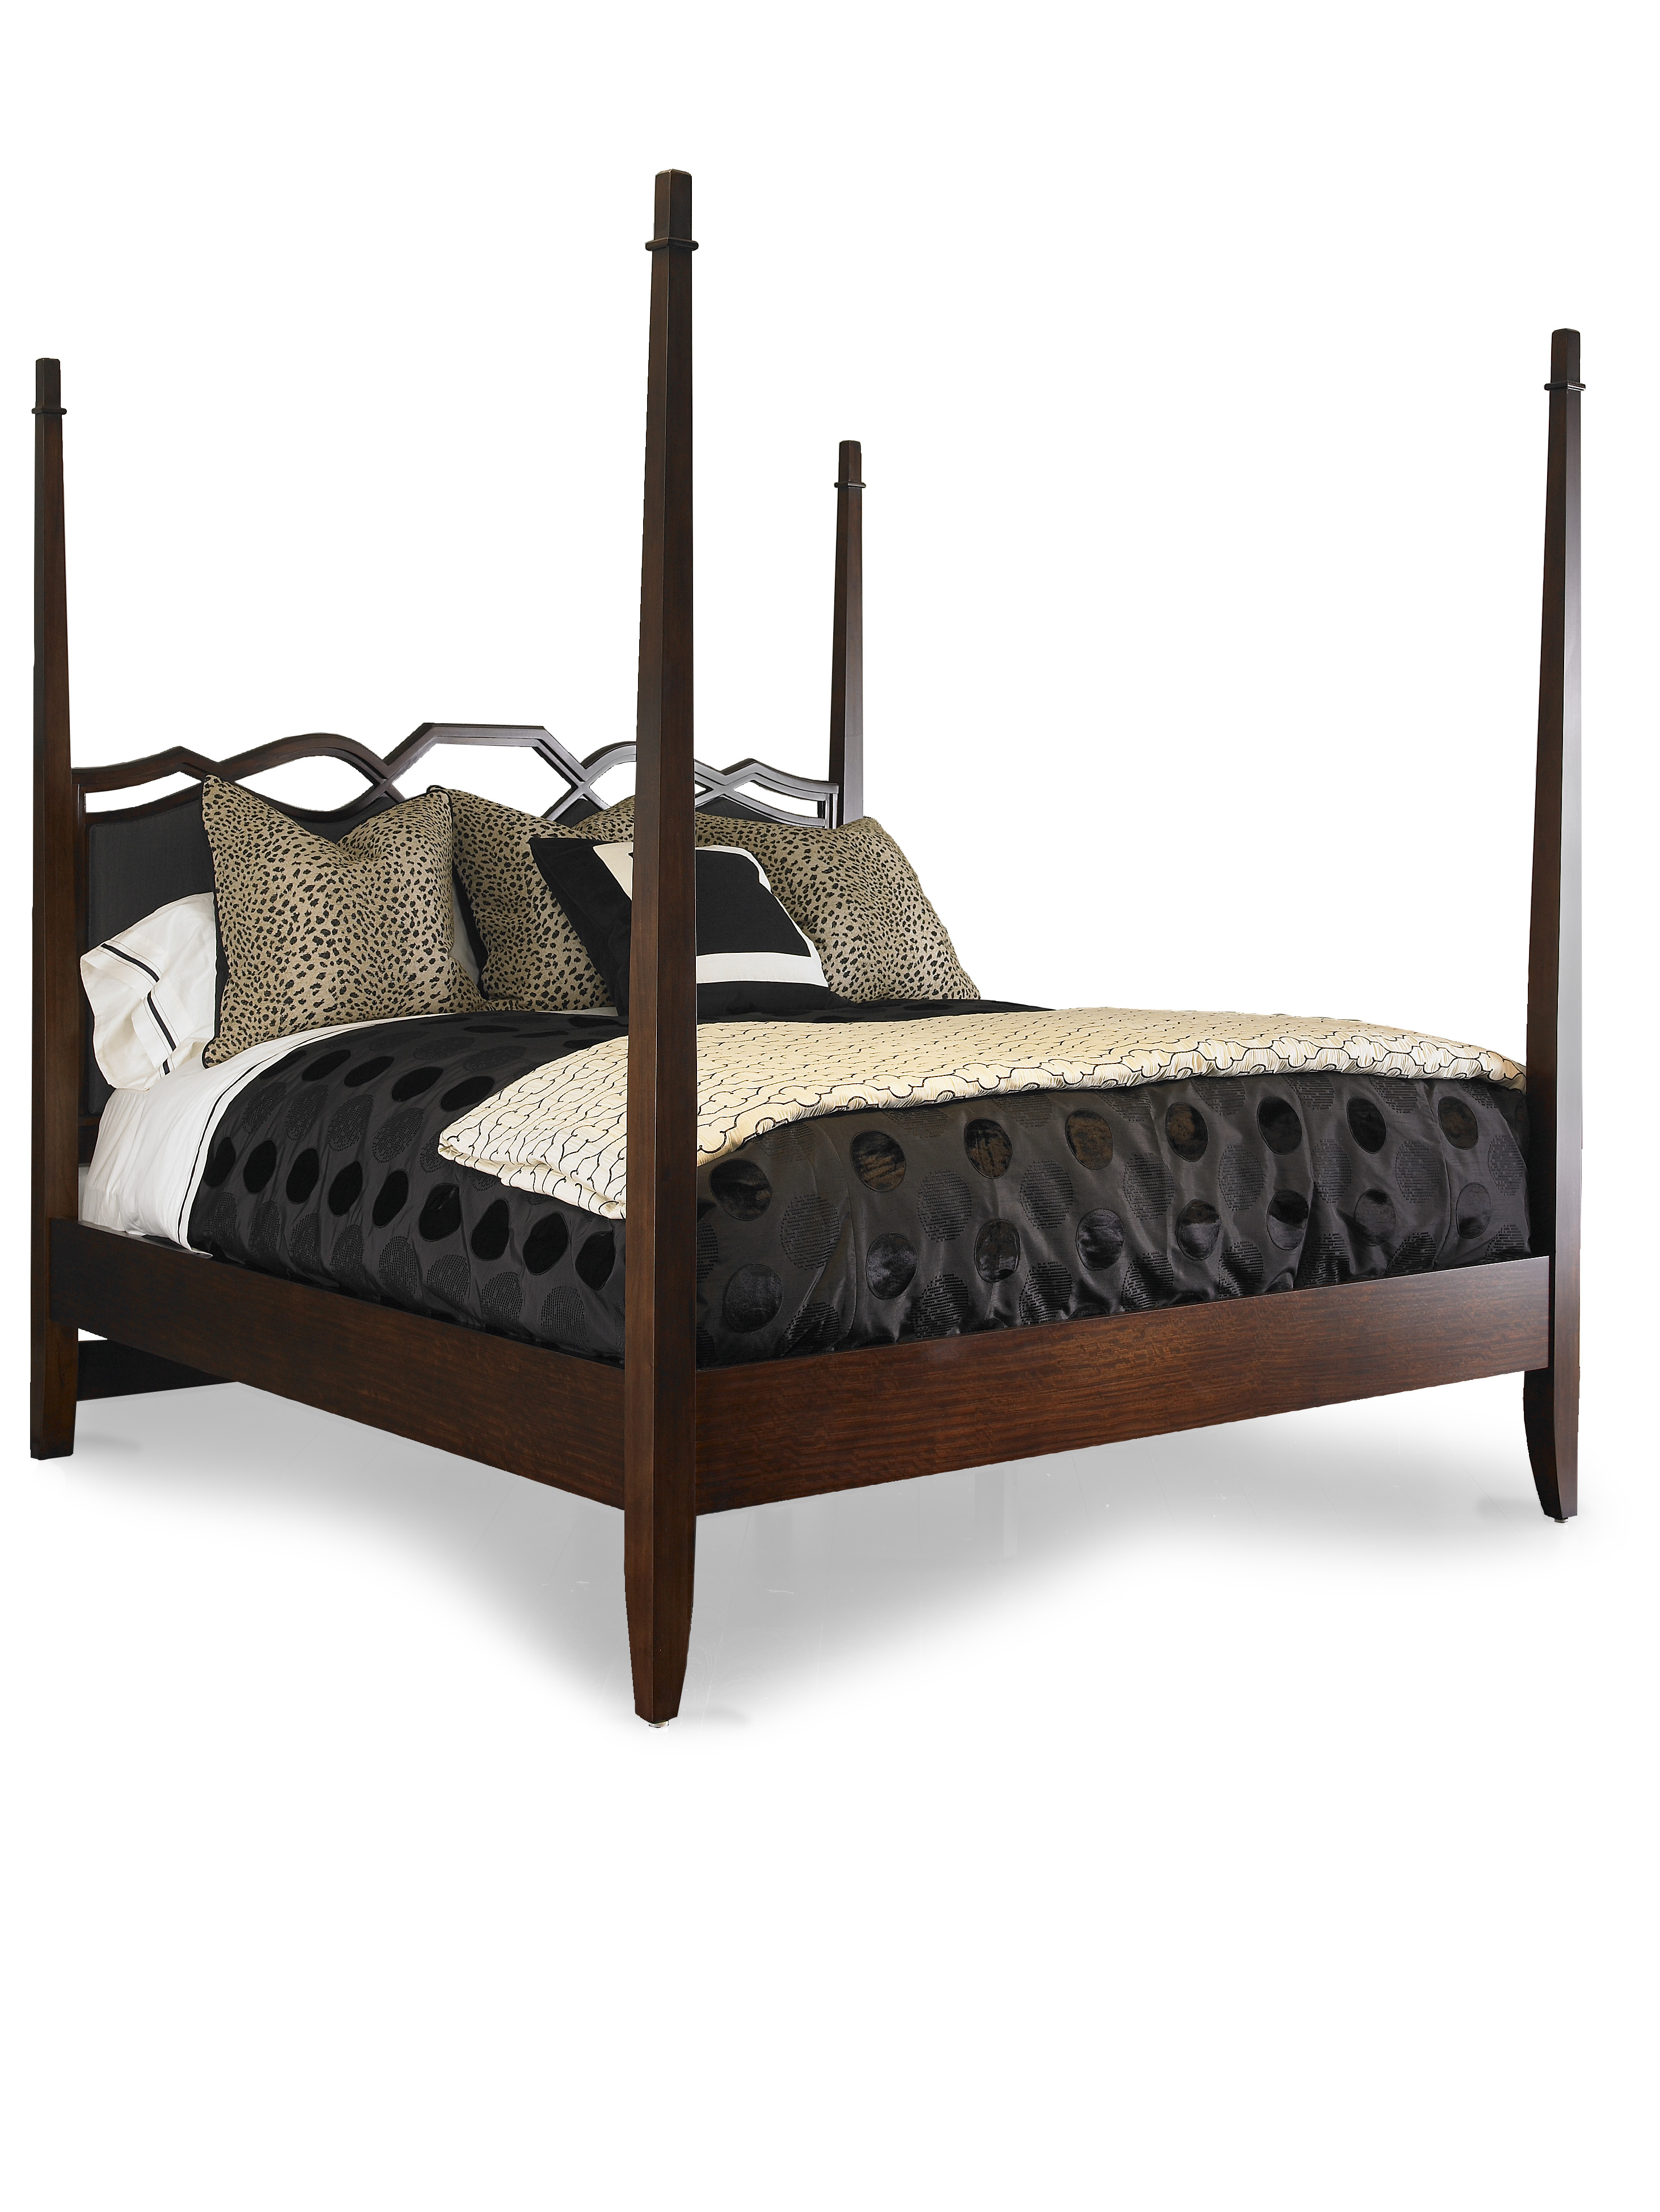 king size poster bed